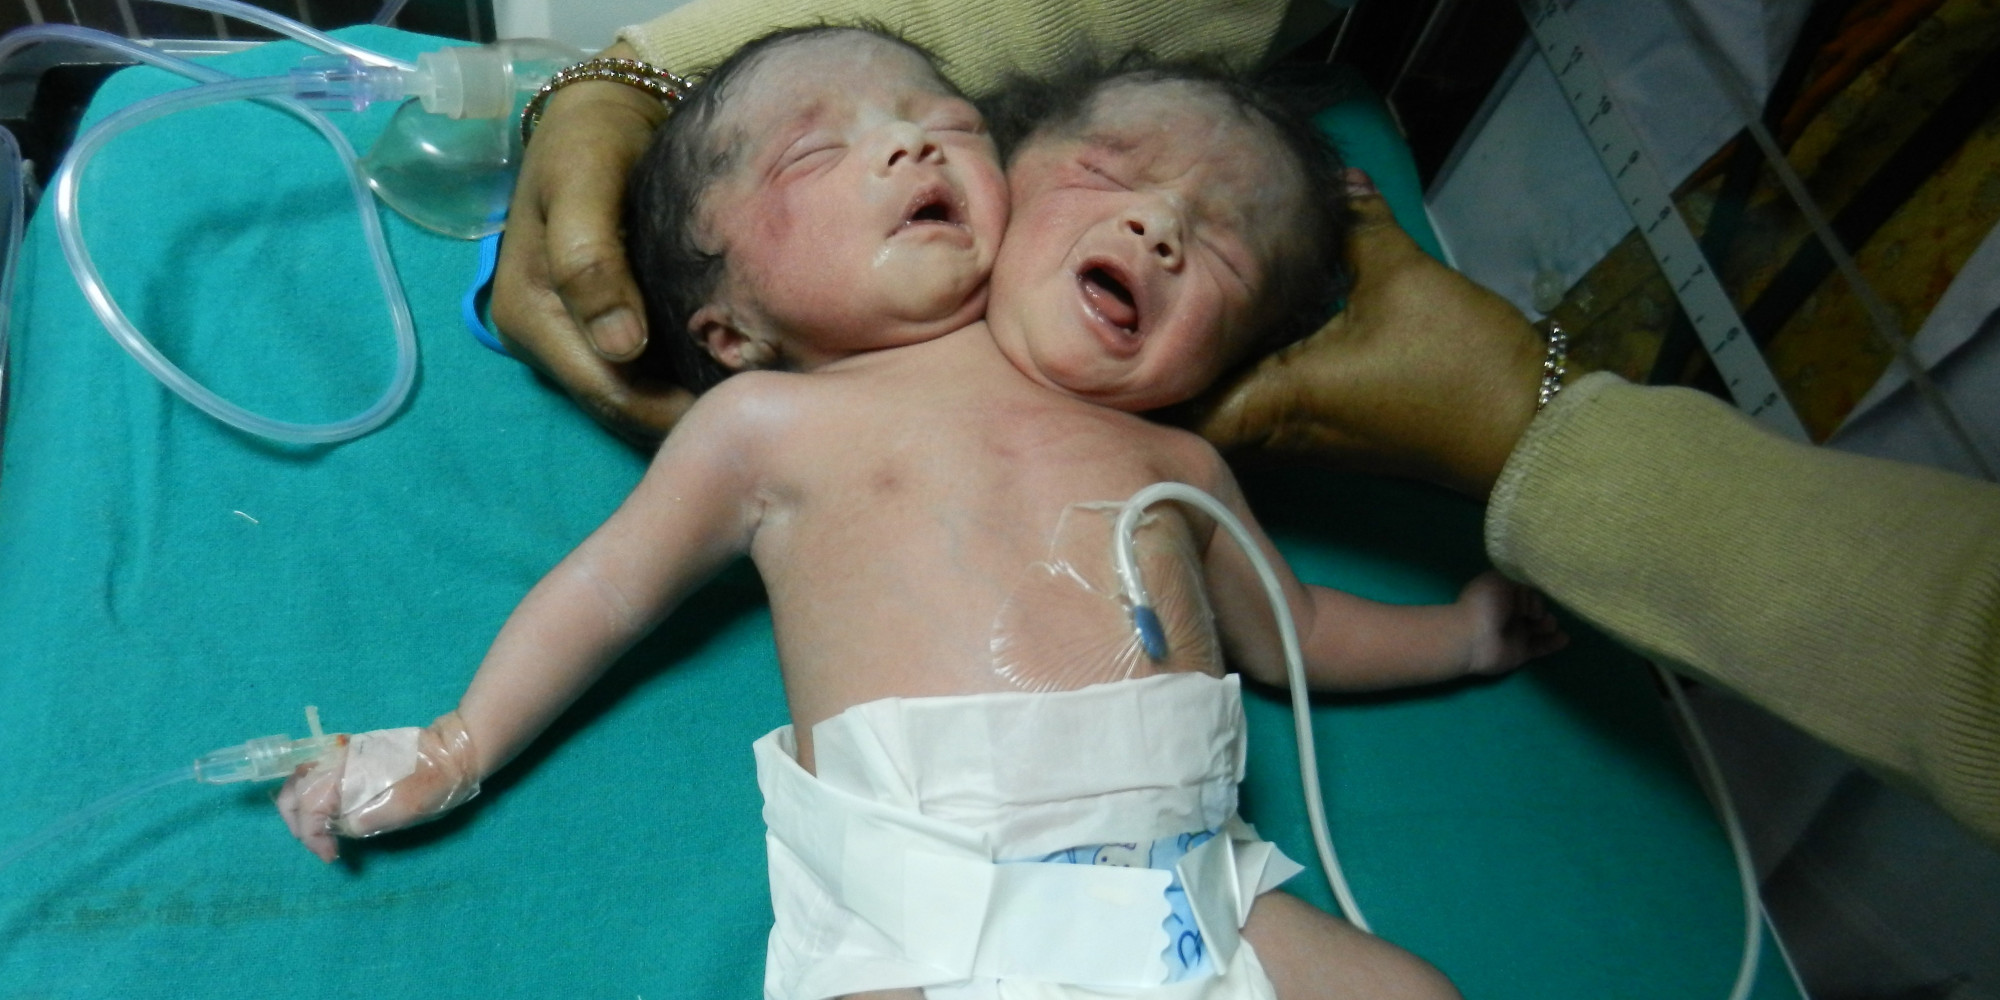 Female Baby Having Two Heads Born In India HuffPost image